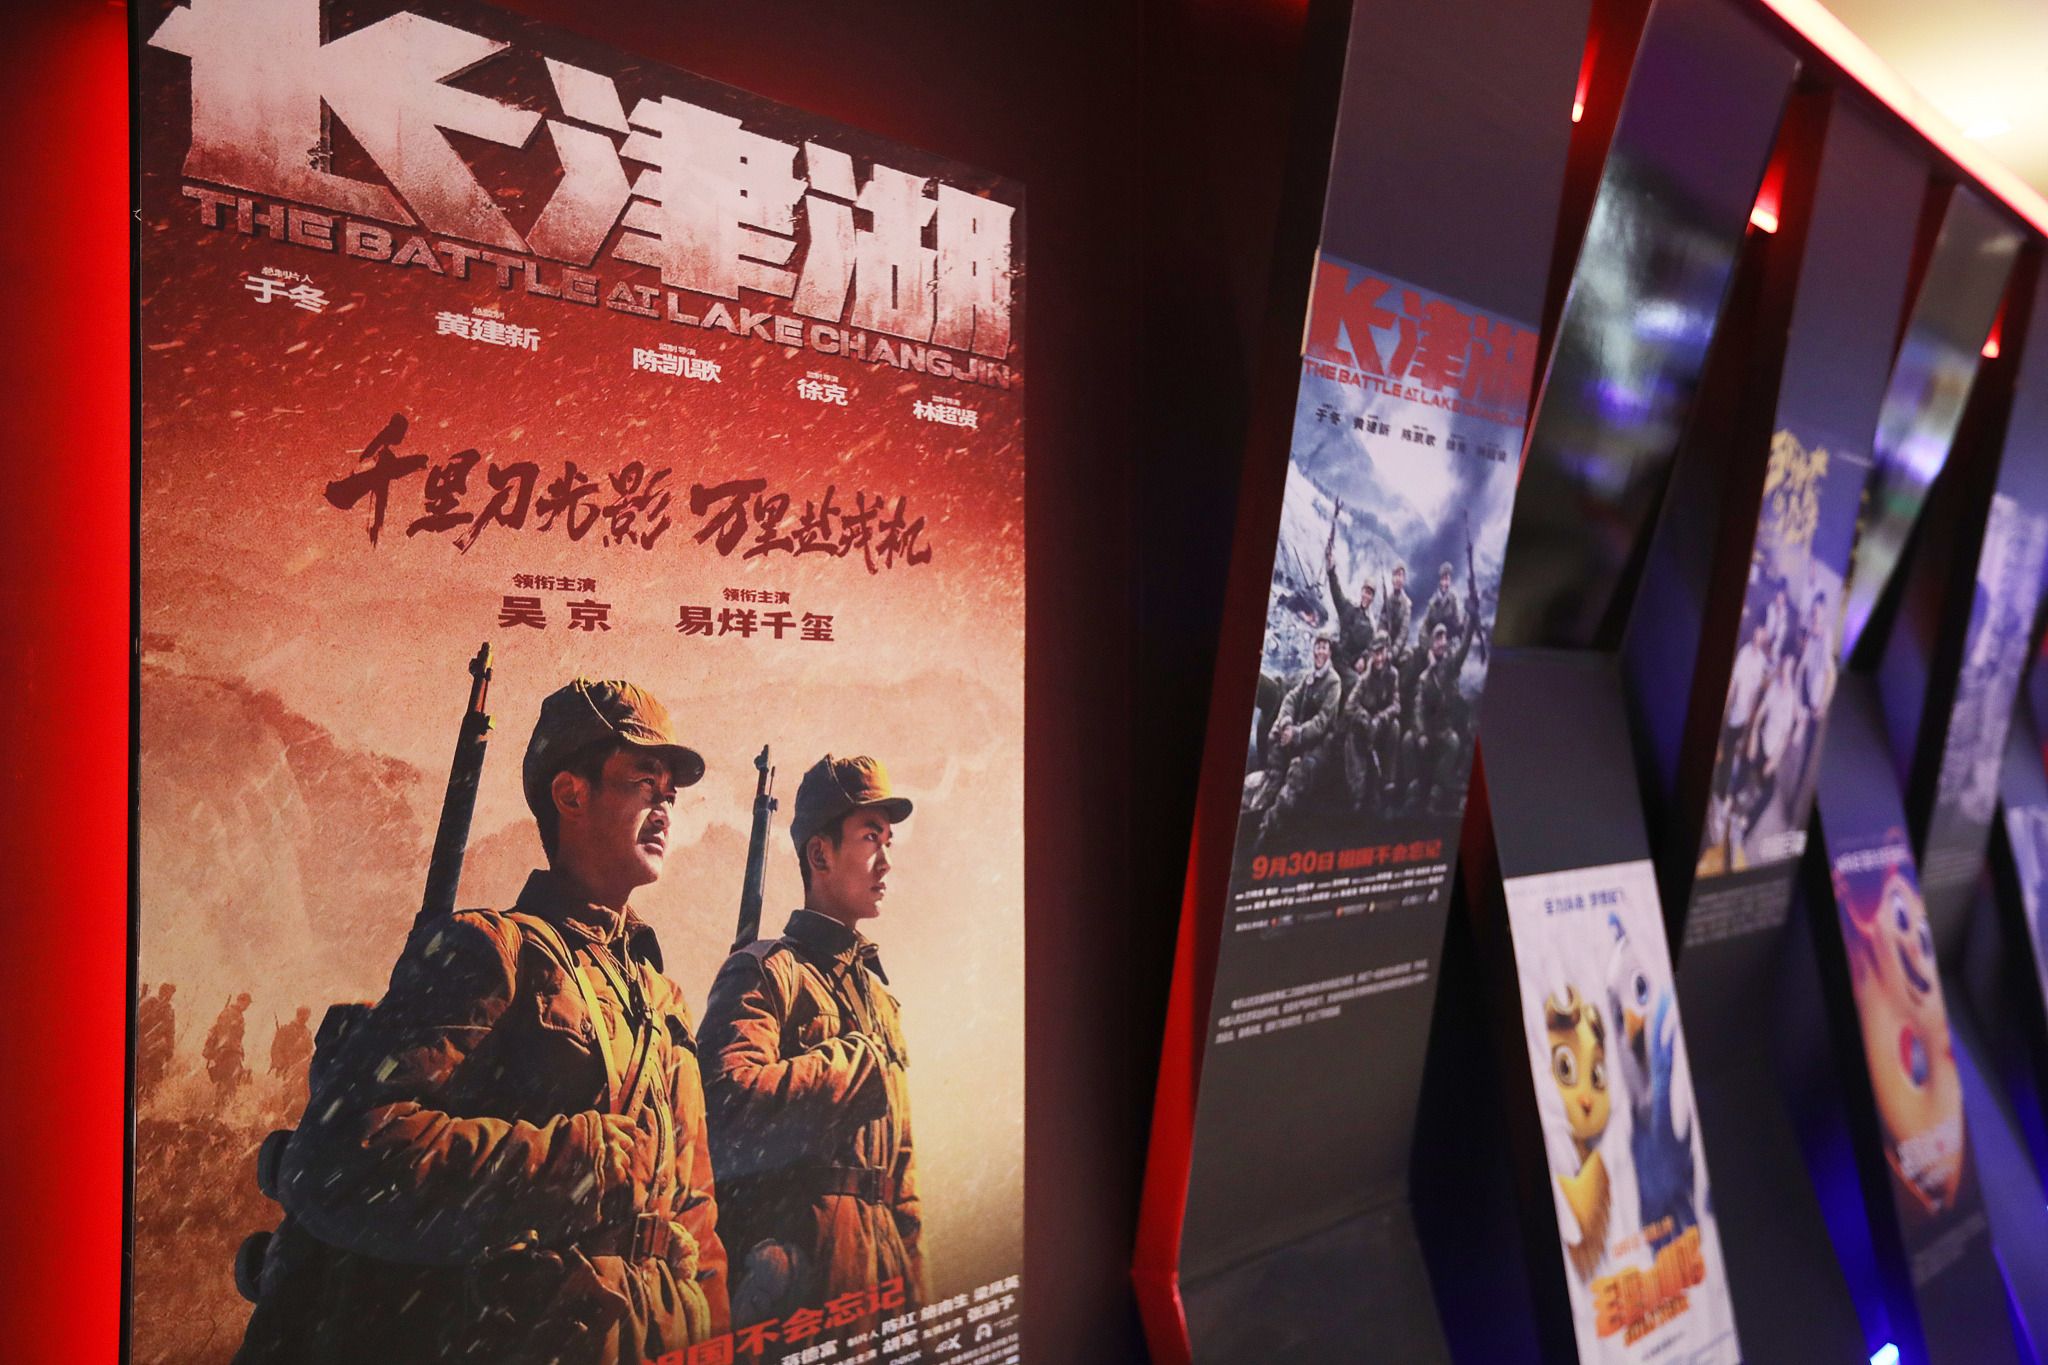 Battle at Lake Changjin: All about 2021's 4th largest film